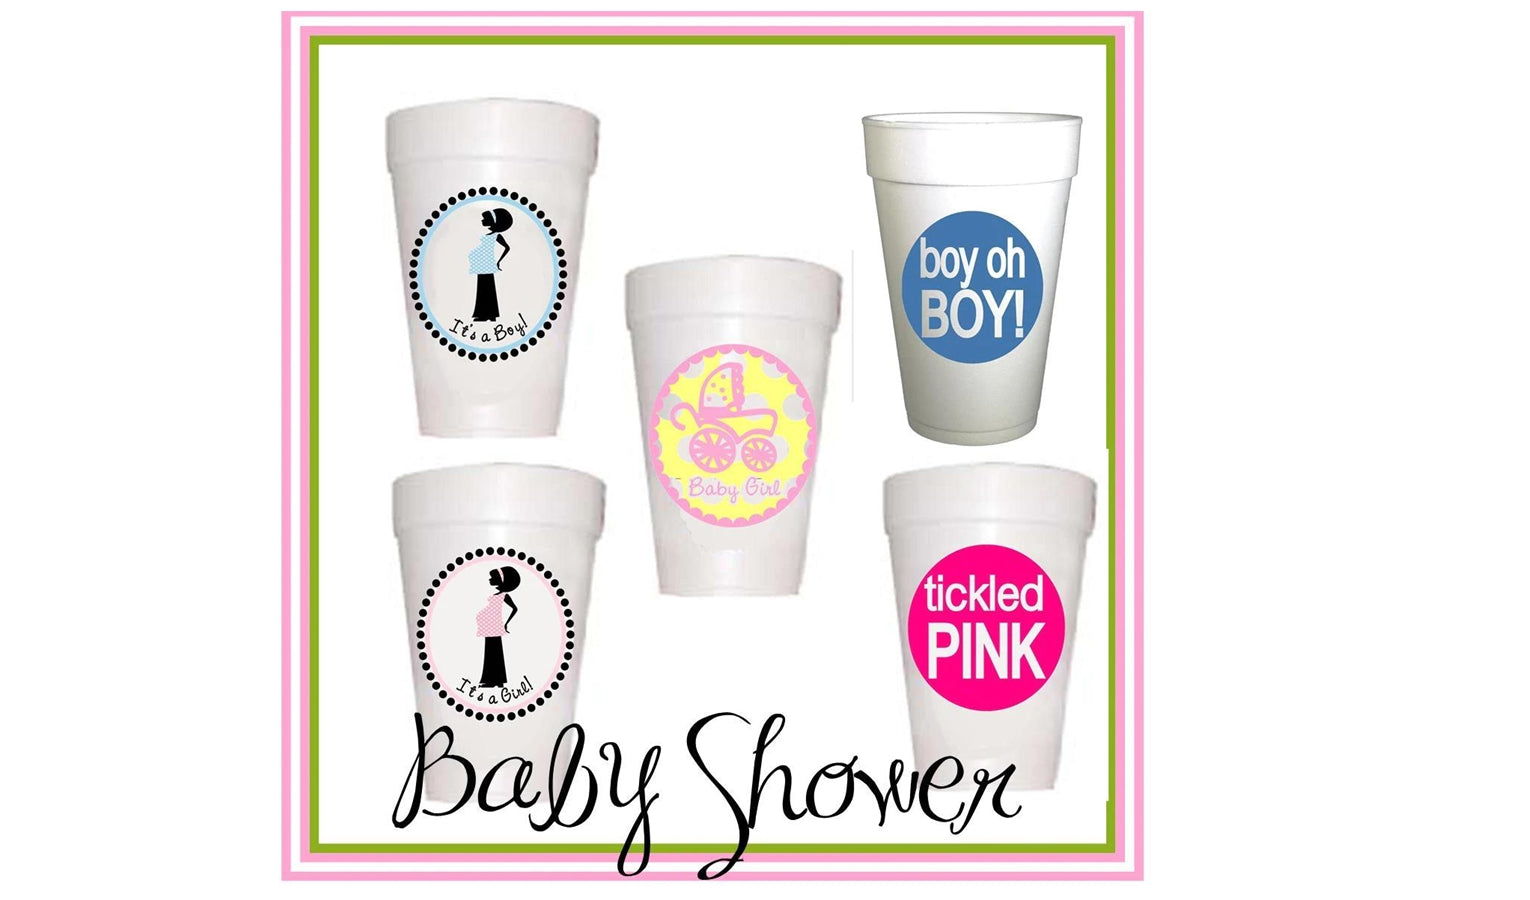 Baby Shower Cups, Party Cups, Wedding Cups, Personalized Cups